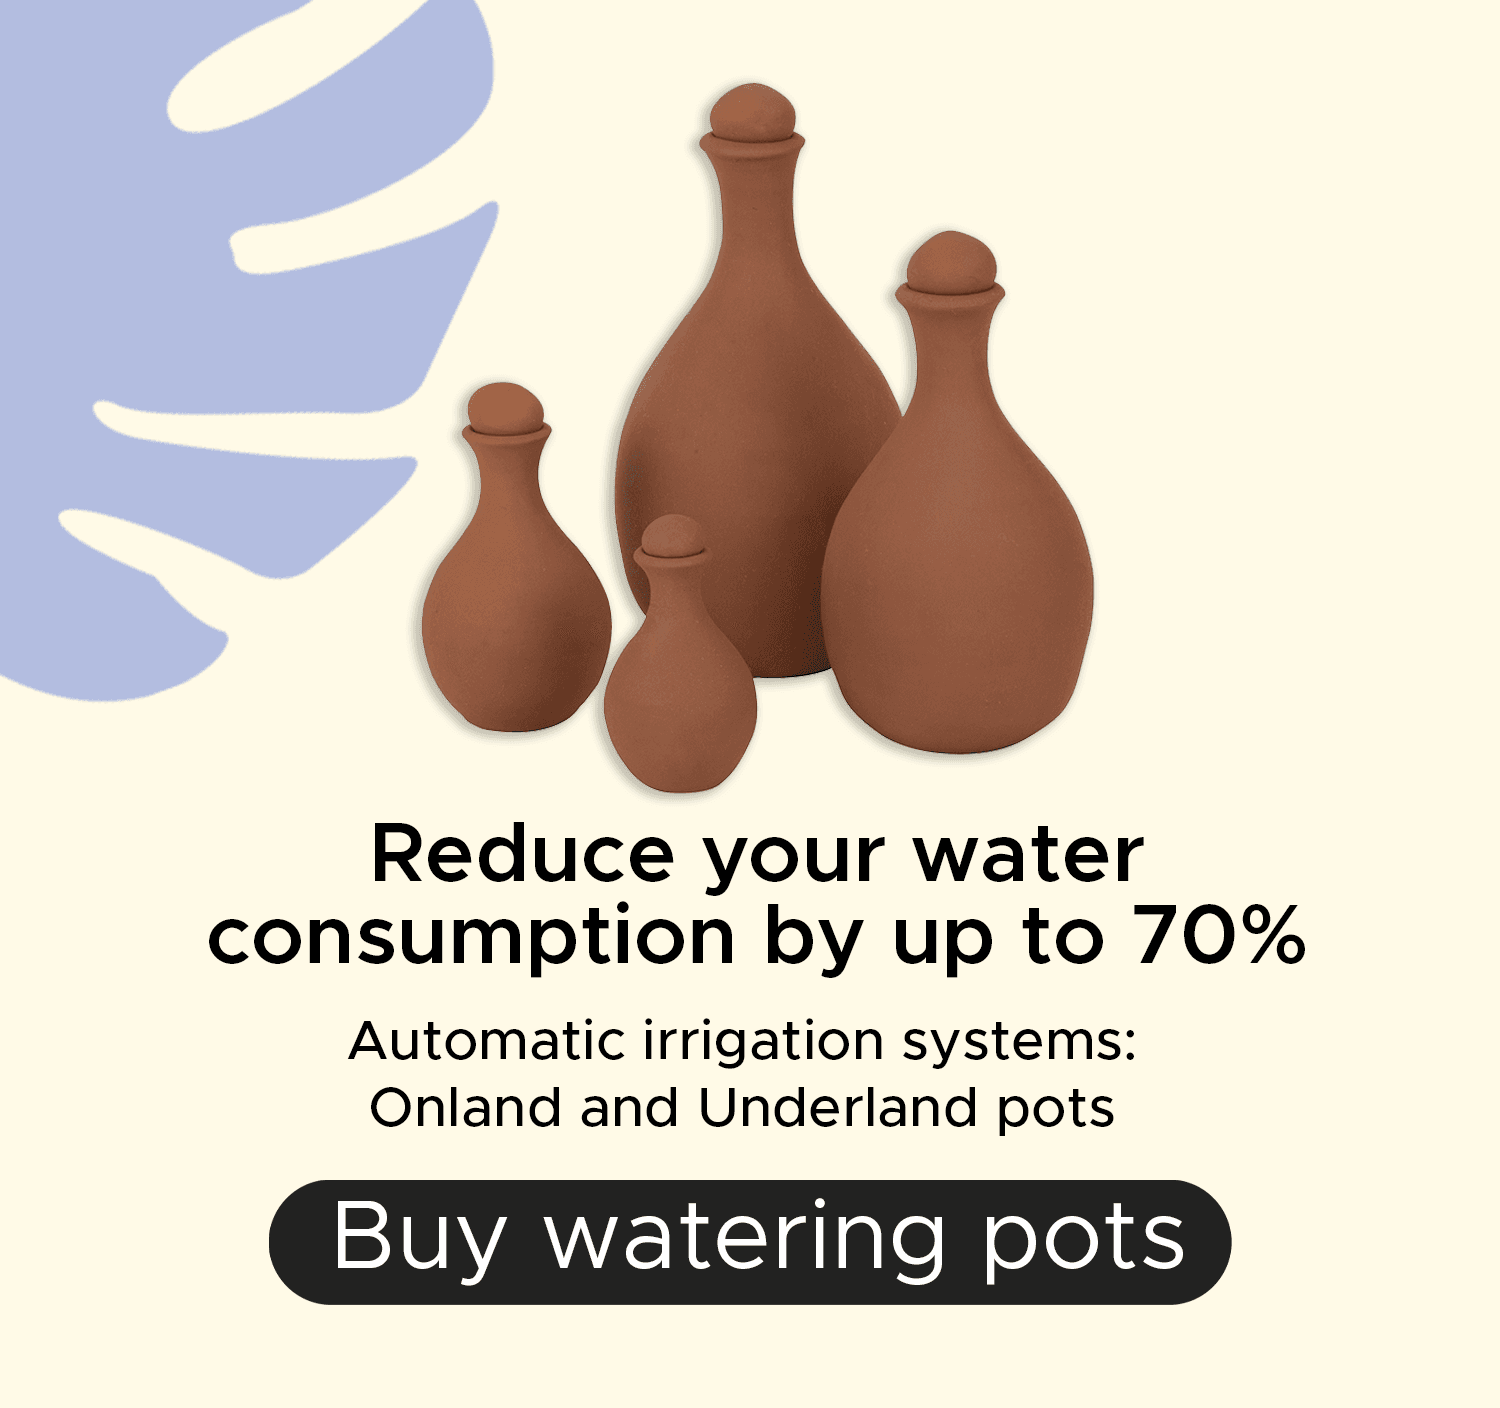 Reduce your water consumption by up to 70% with Meliflor watering pots.